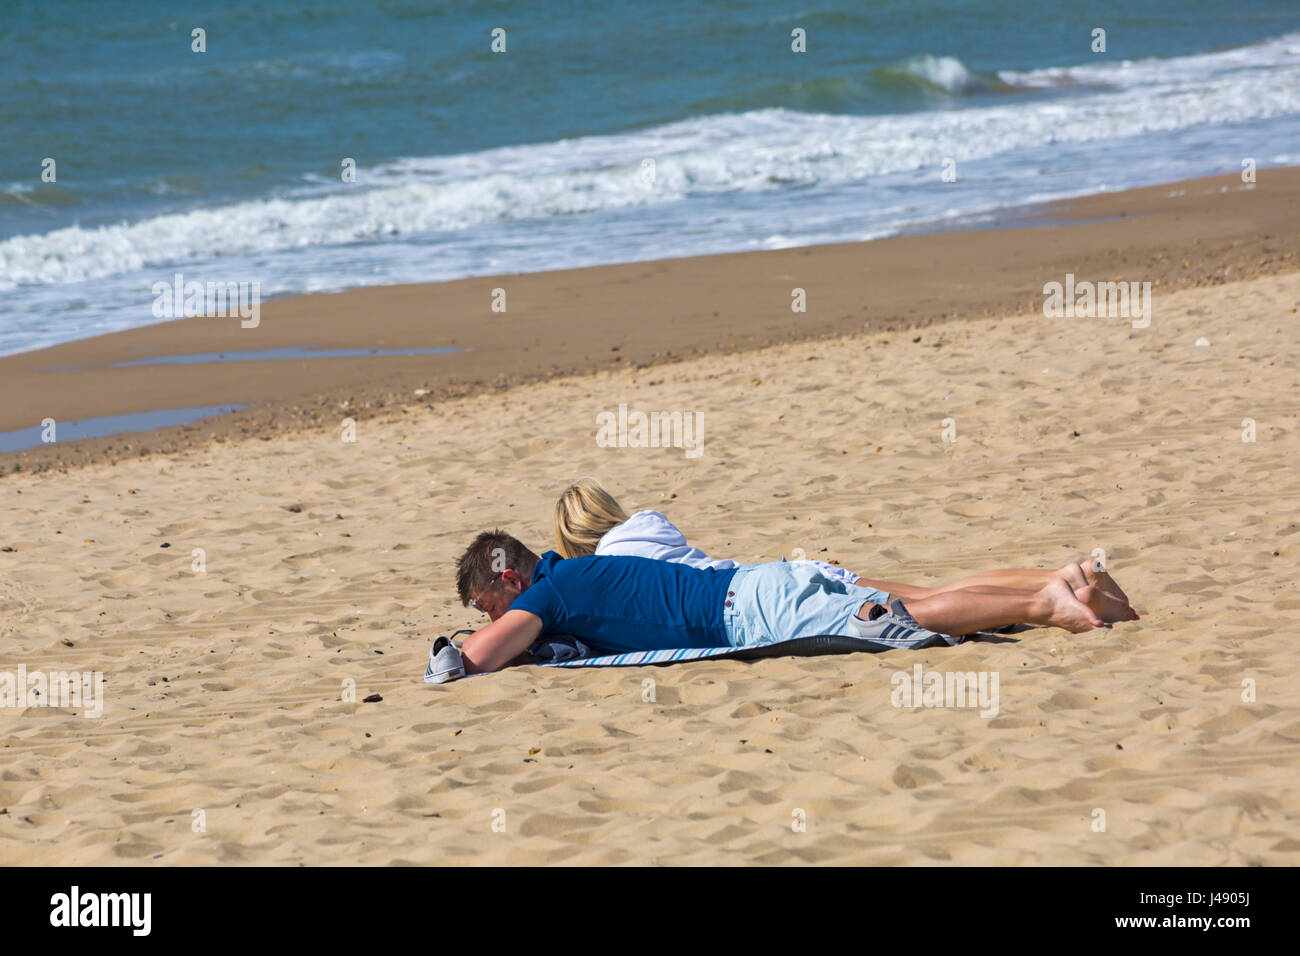 Bournemouth, Dorset, UK. 10th May, 2017. UK weather: lovely warm sunny day as visitors head to the seaside to make the most of the sunshine at Bournemouth beaches. Couple sunbathing on the beach. Credit: Carolyn Jenkins/Alamy Live News Stock Photo